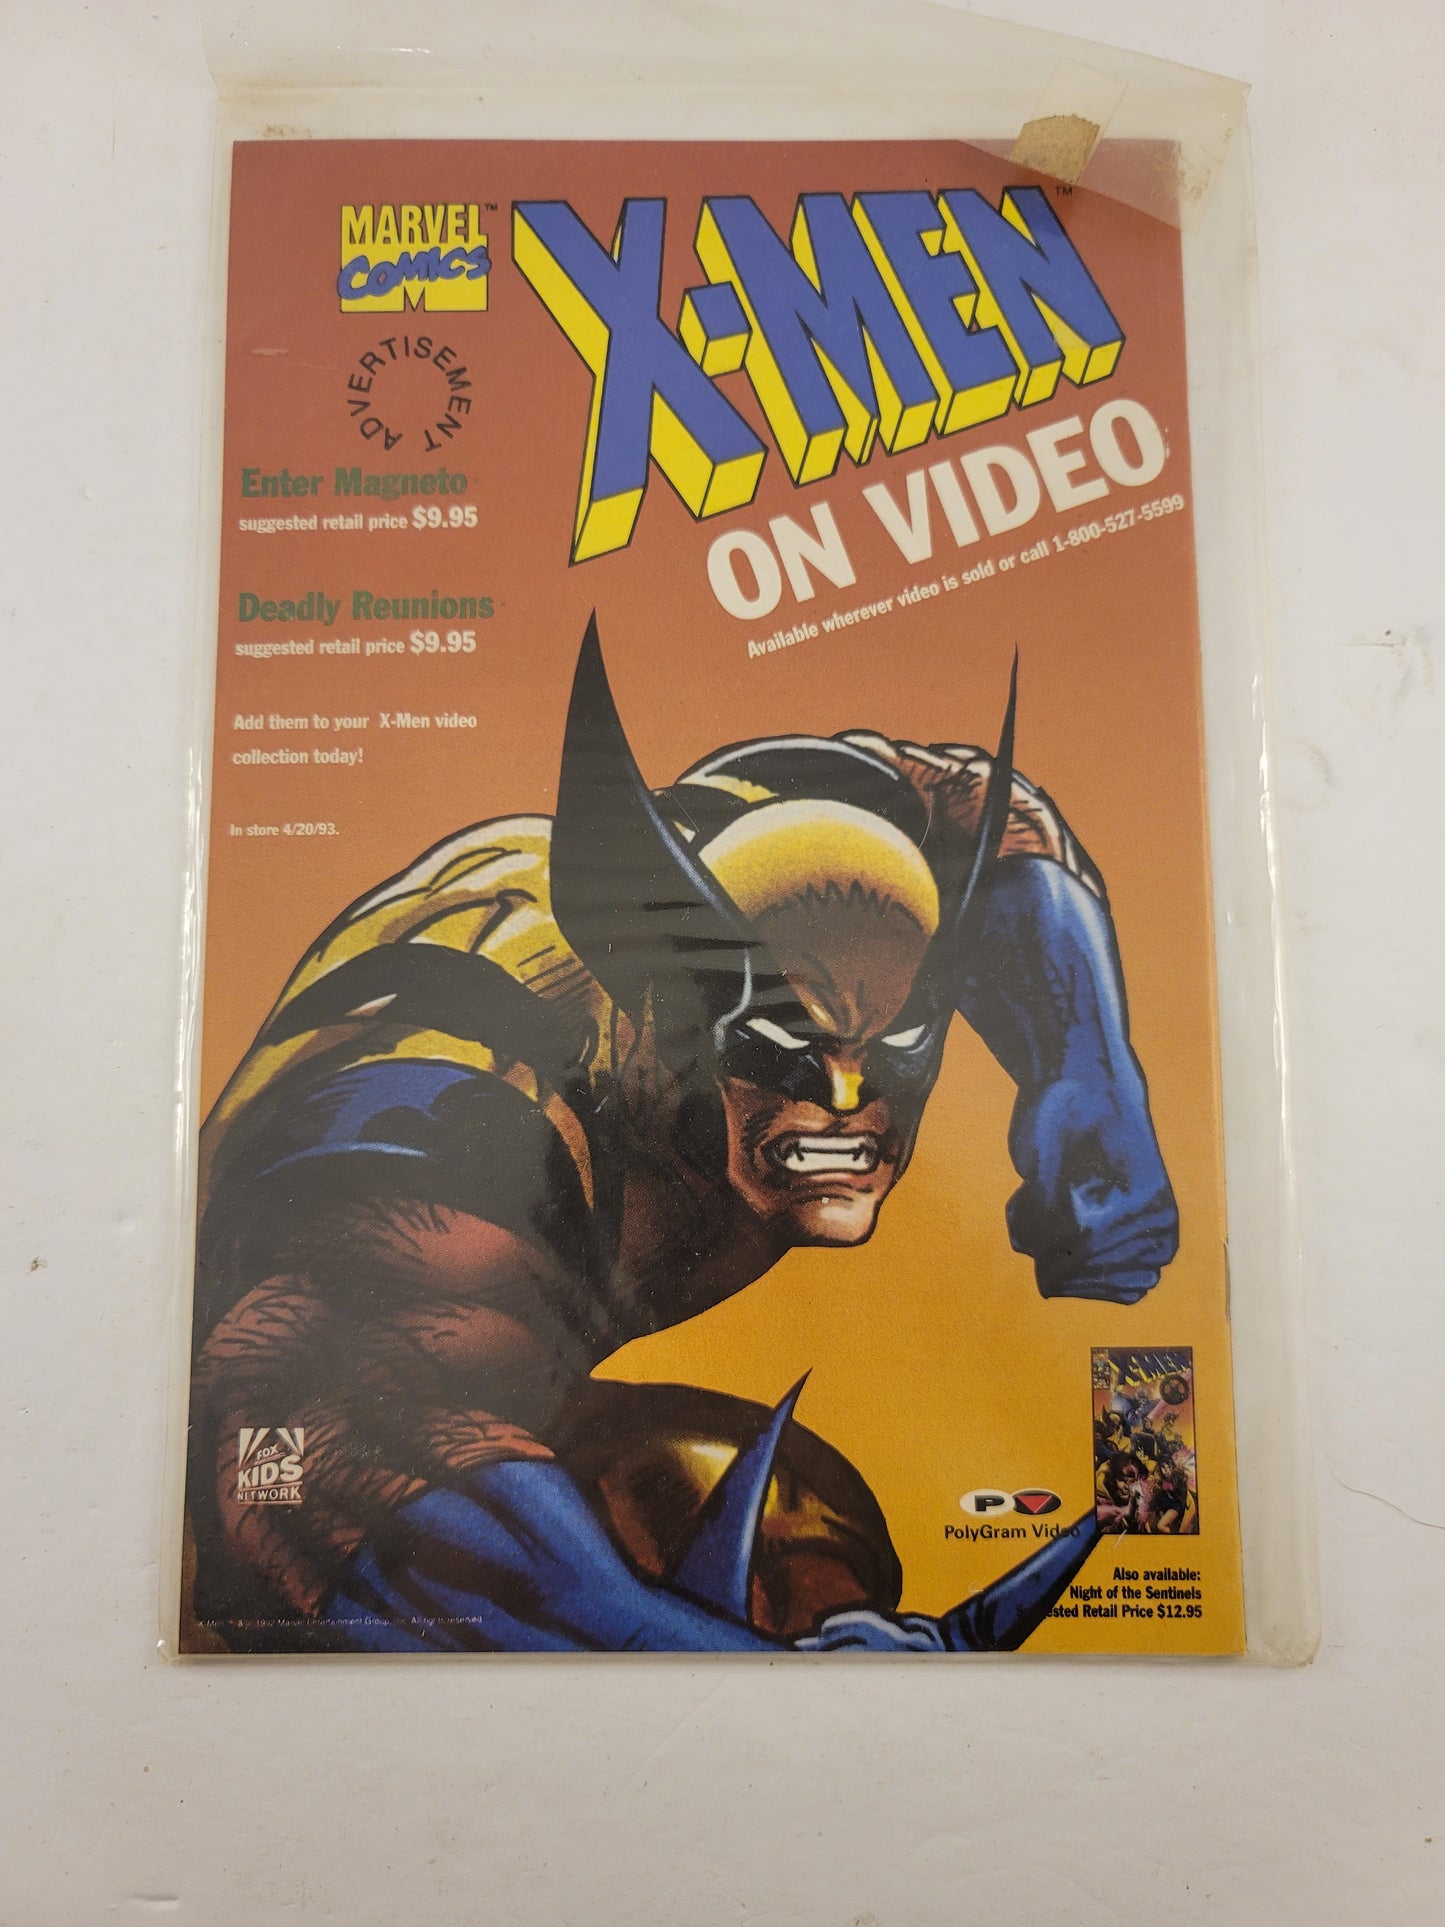 The Amazing Spider-Man Volume 1 Issue 377 (May 1993) Marvel Comics